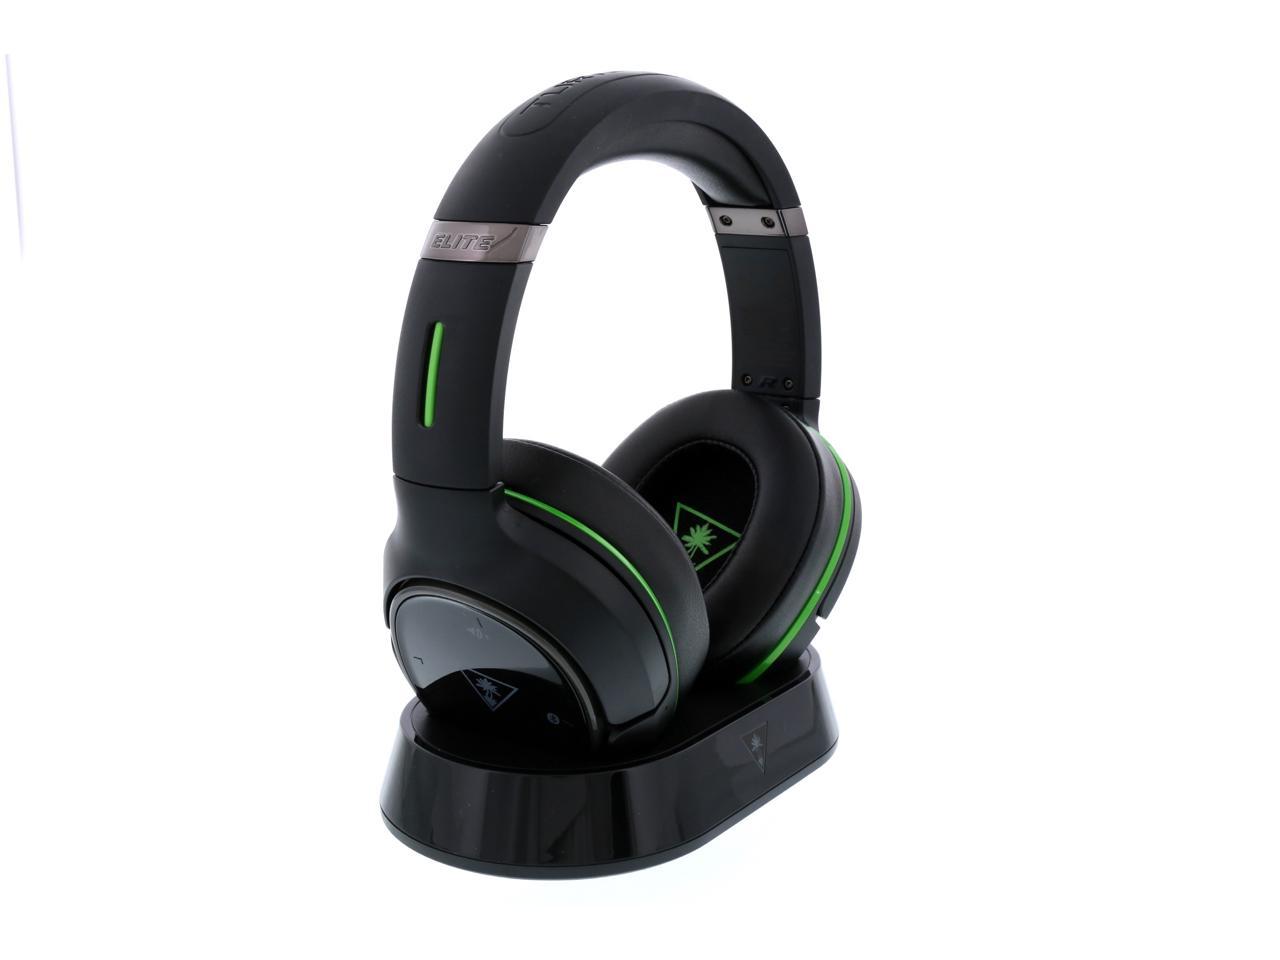 Meenemen veerboot zoom Turtle Beach Ear Force Elite 800X Premium Fully Wireless Noise-Cancelling  DTS Surround Sound Gaming Headset for Xbox One - Newegg.com